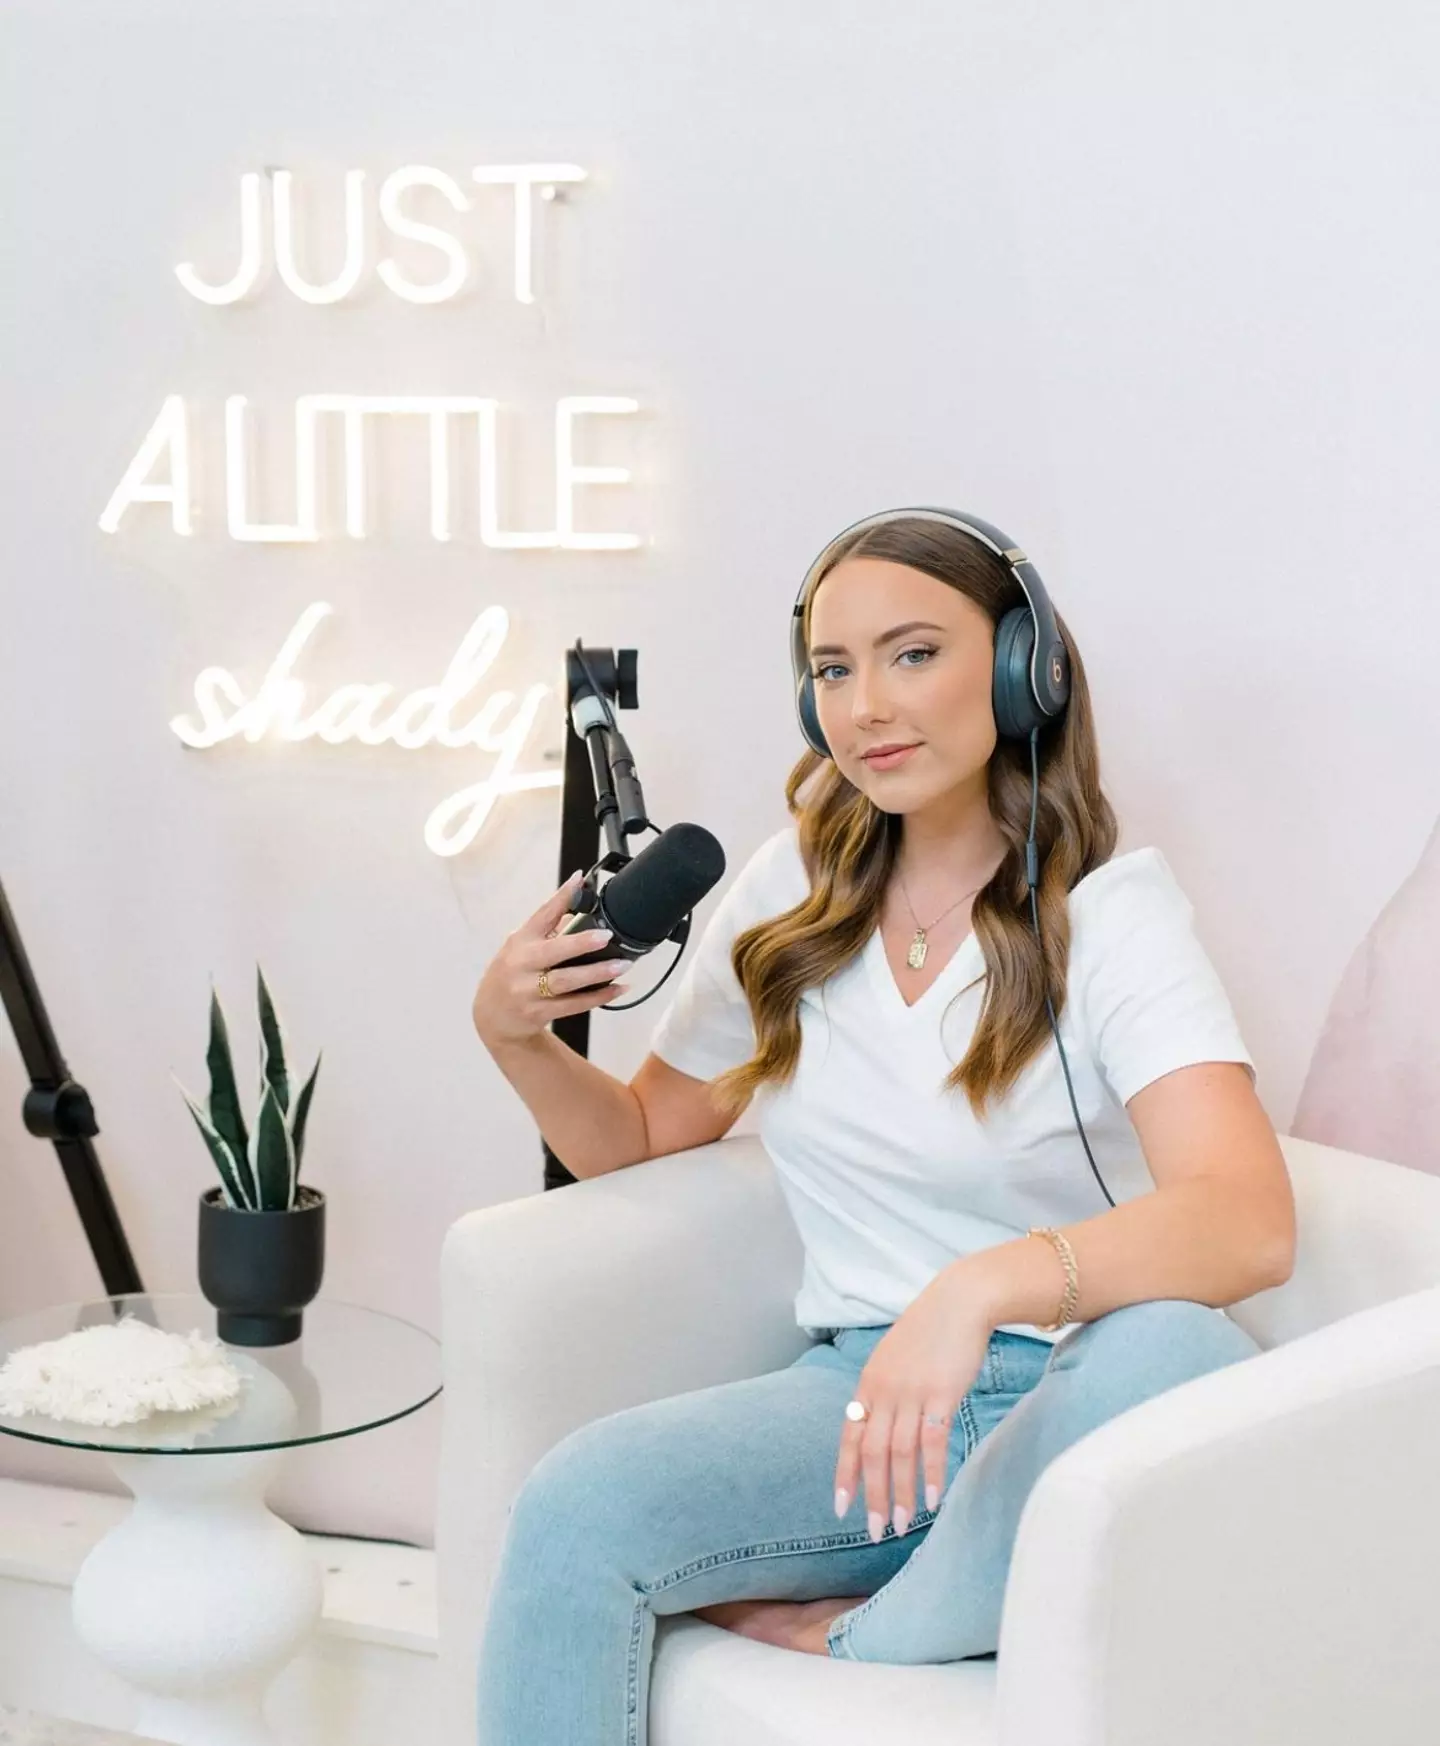 Hailie's new podcast is called 'Just a little shady'.